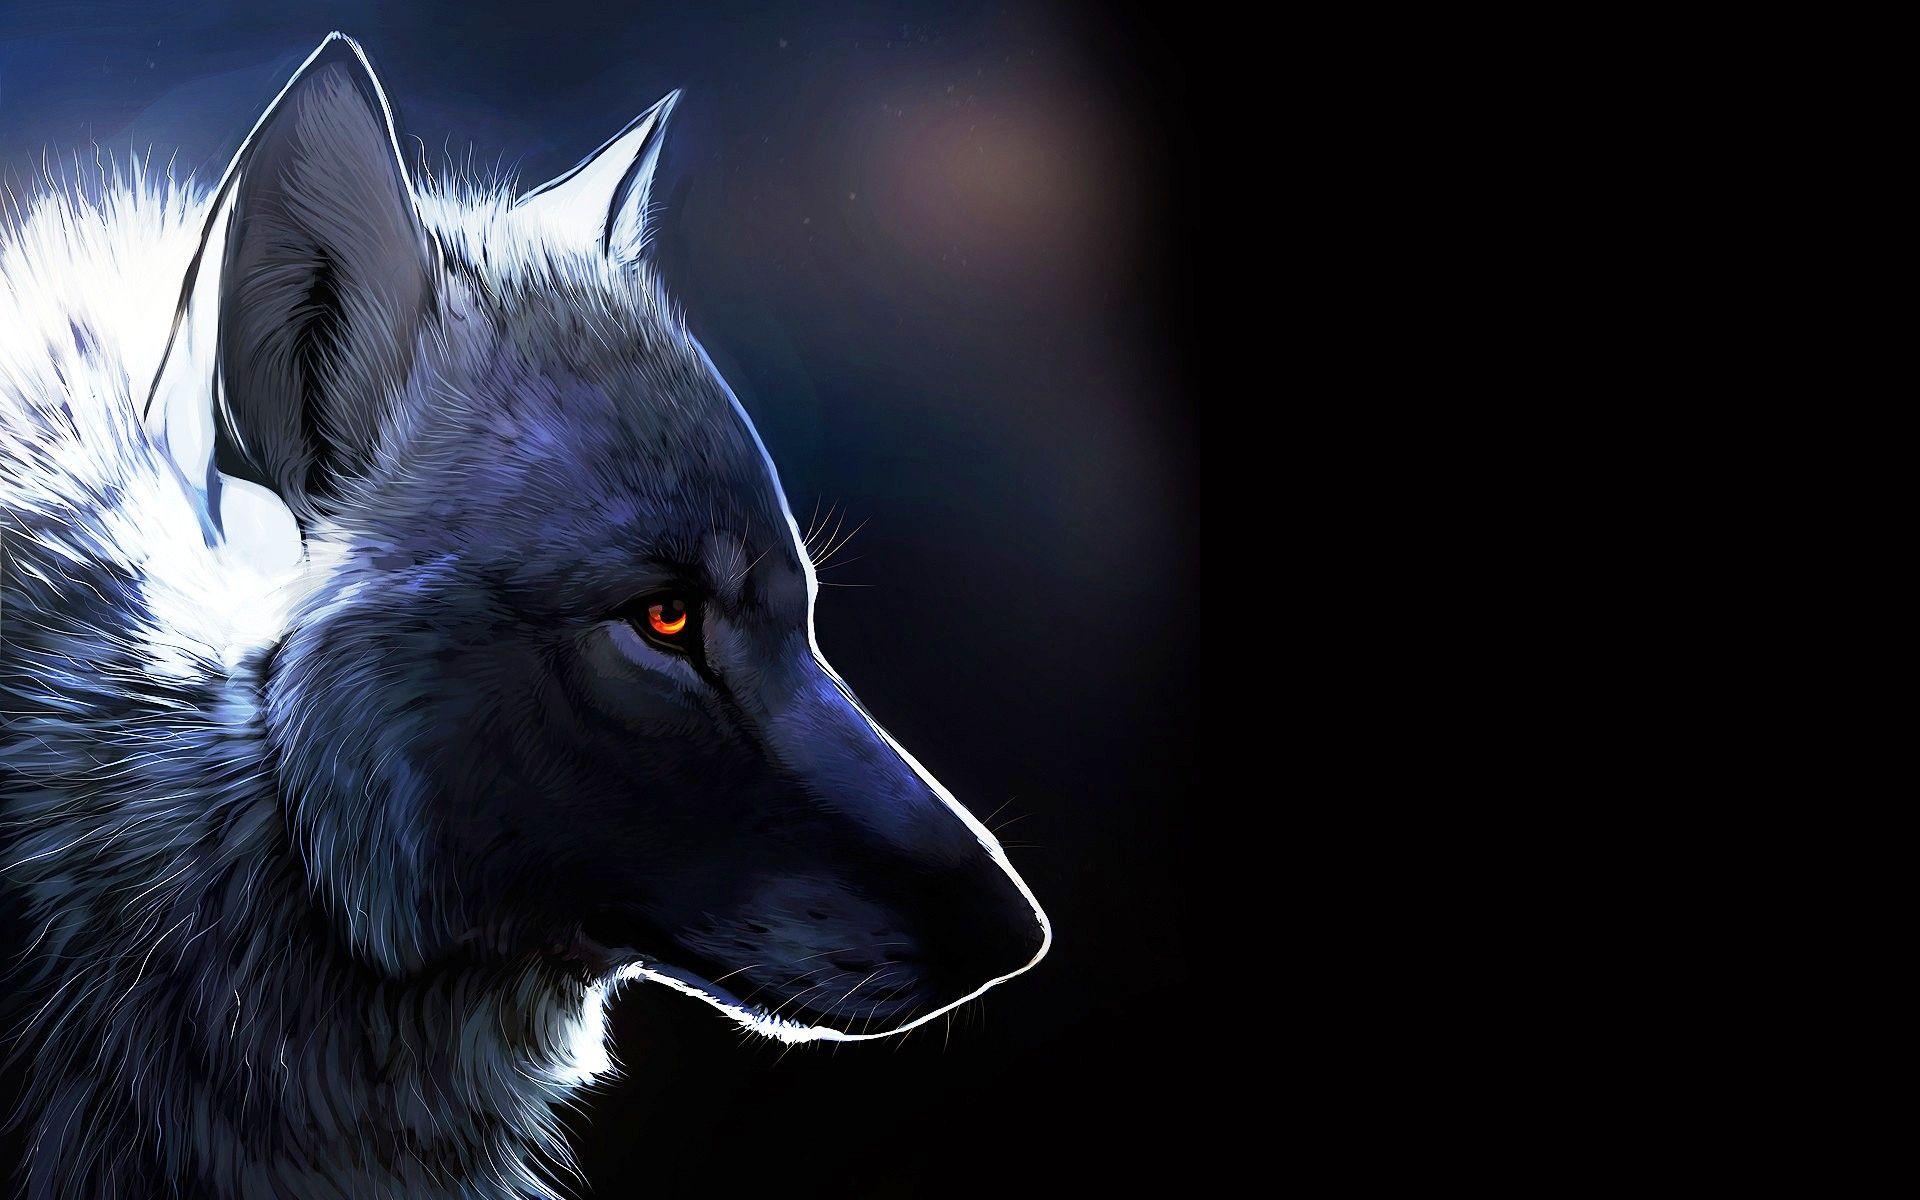 alpha wolf Animated Pictures for Sharing 89639623  Blingeecom